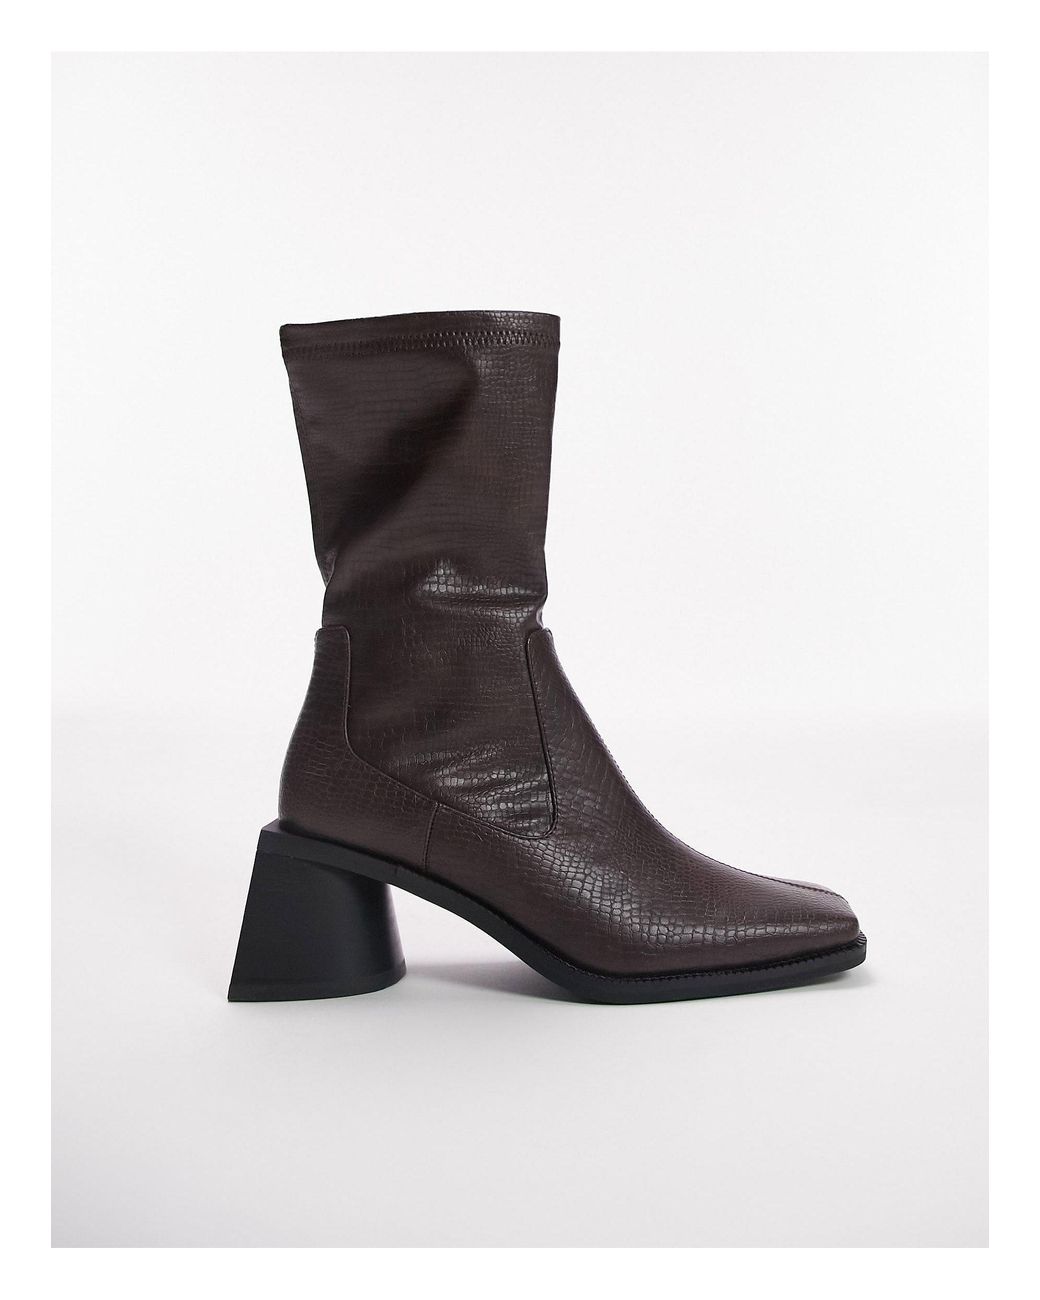 TOPSHOP Millie Square Toe Sock Boot in Black | Lyst